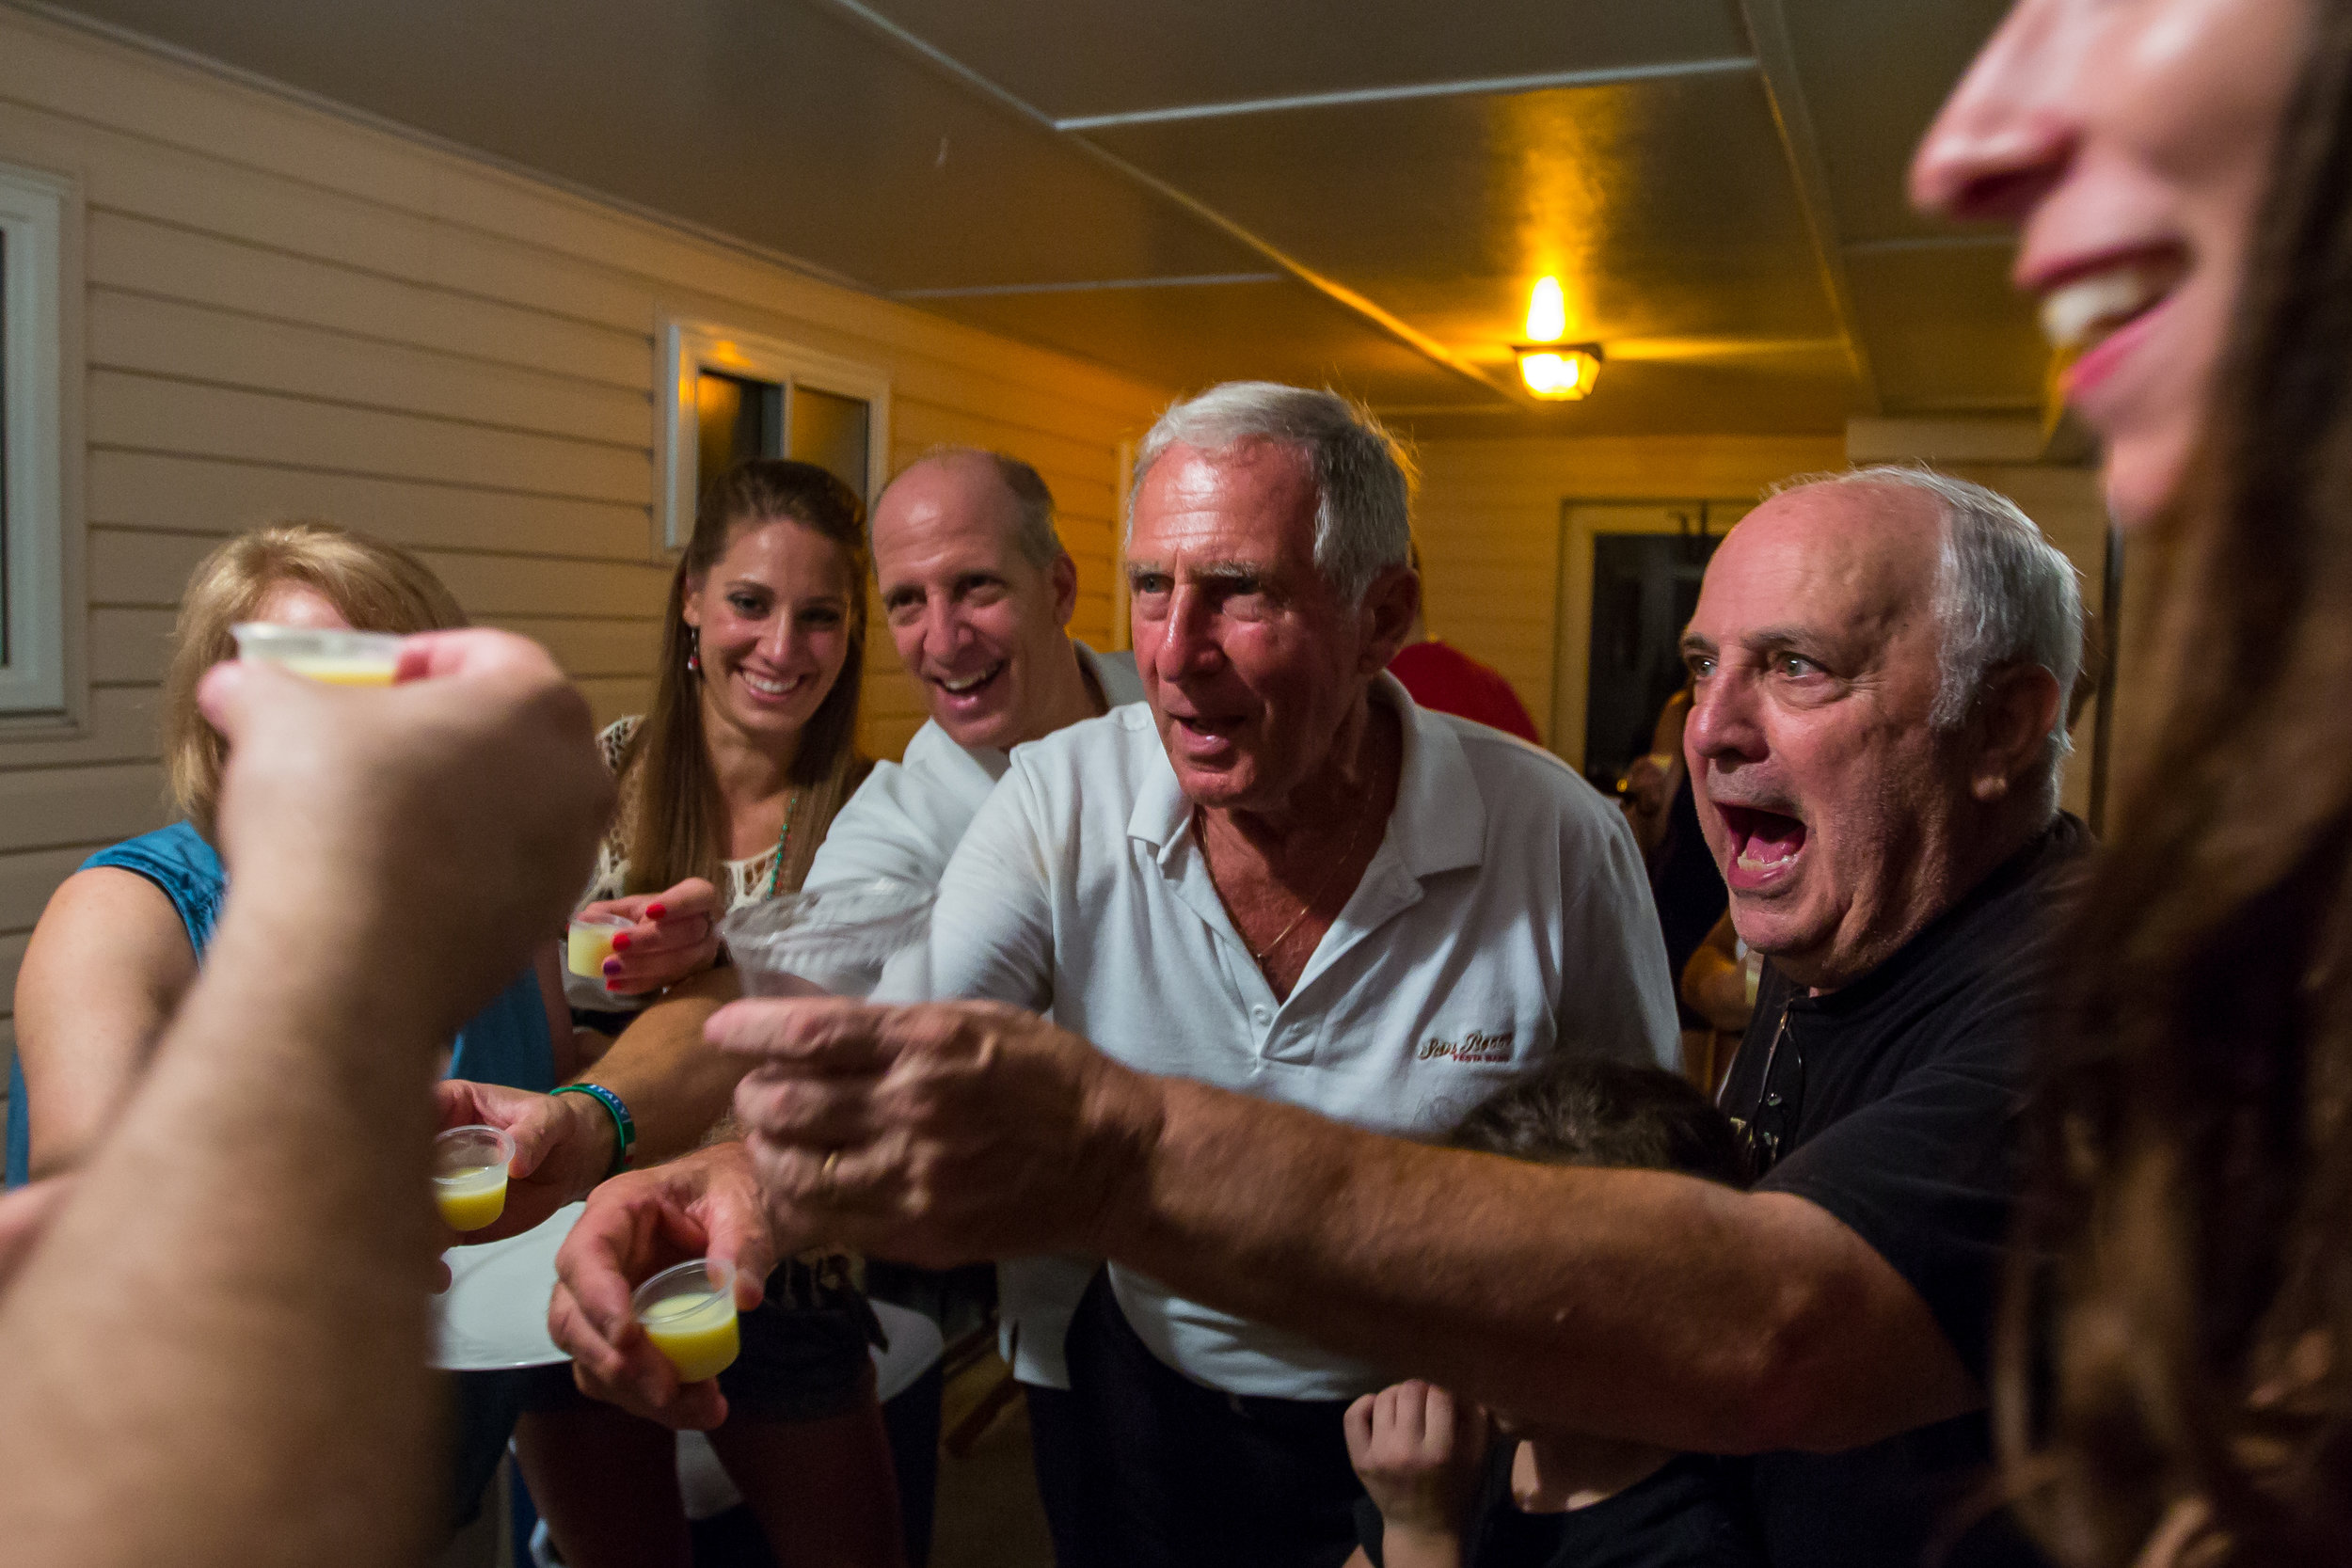  Henry Bufalini, center, raises a shot of limoncello at a close friends house after the first night of the 91st San Rocco Festa in Aliquippa on Friday. Each year after the first night of the festival, family and close friends go to multiple houses to